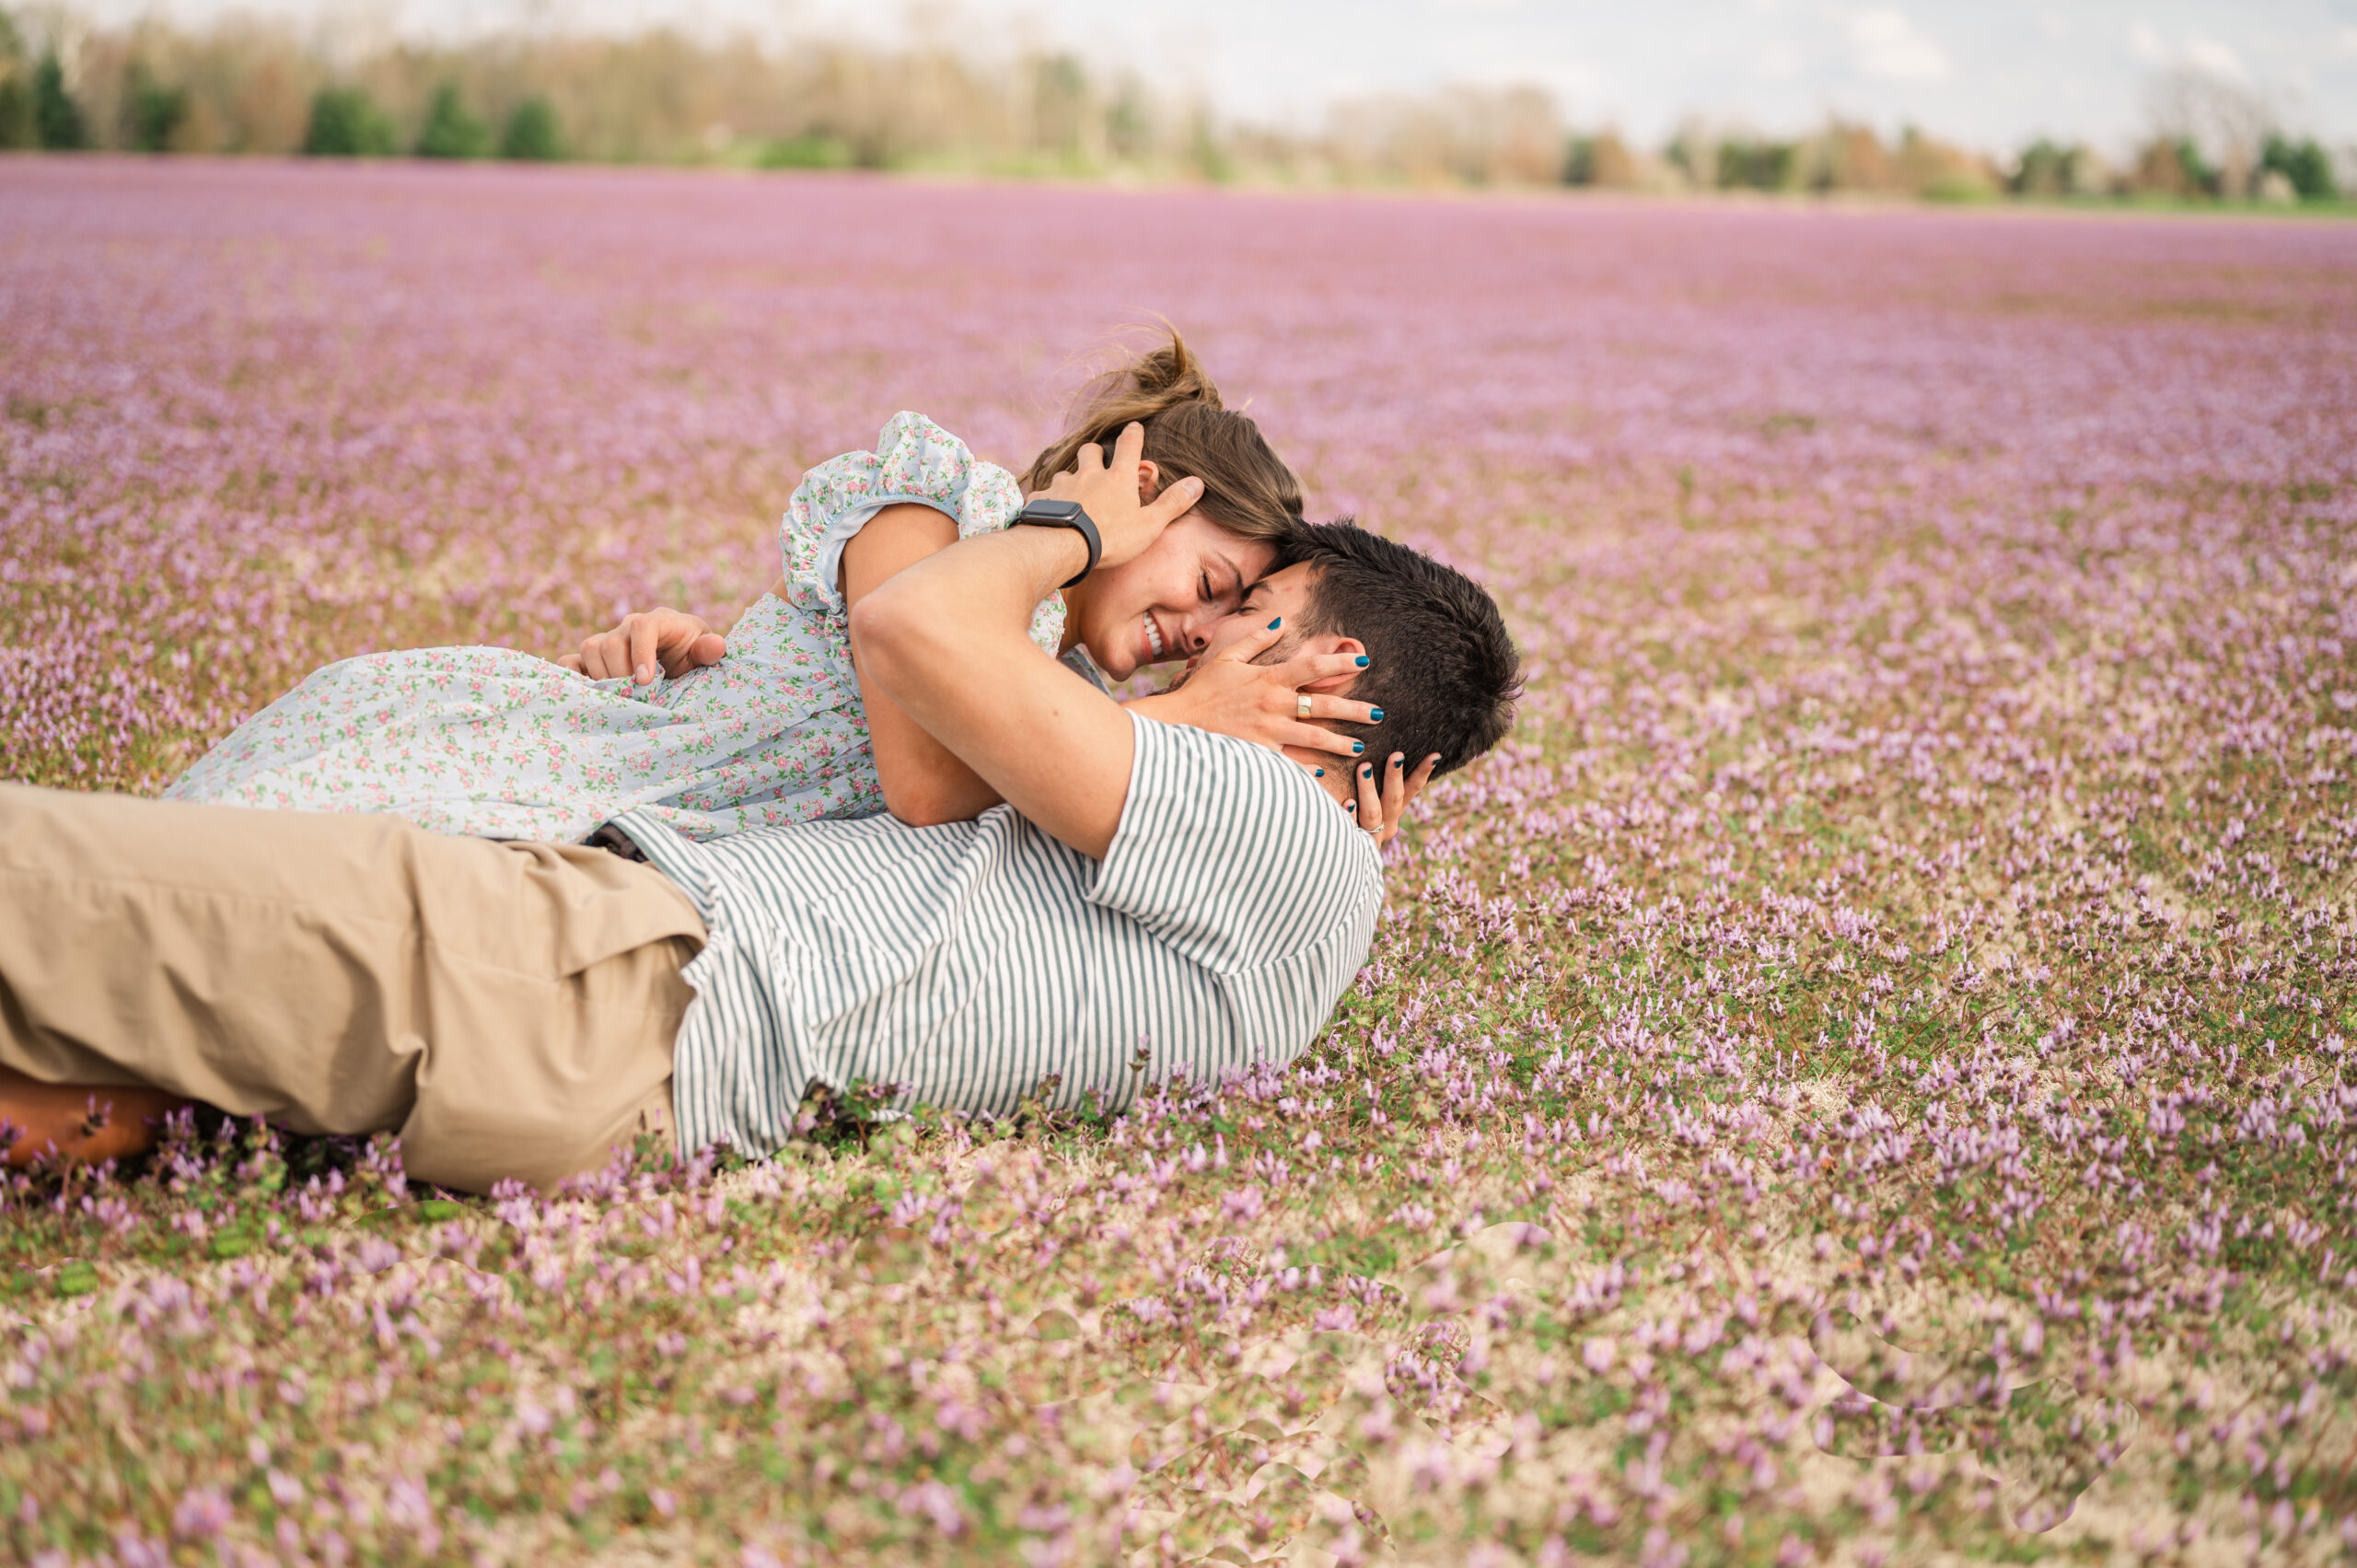 A couple shares a kiss laying in a field of purple flowers at the Kentucky Horse park